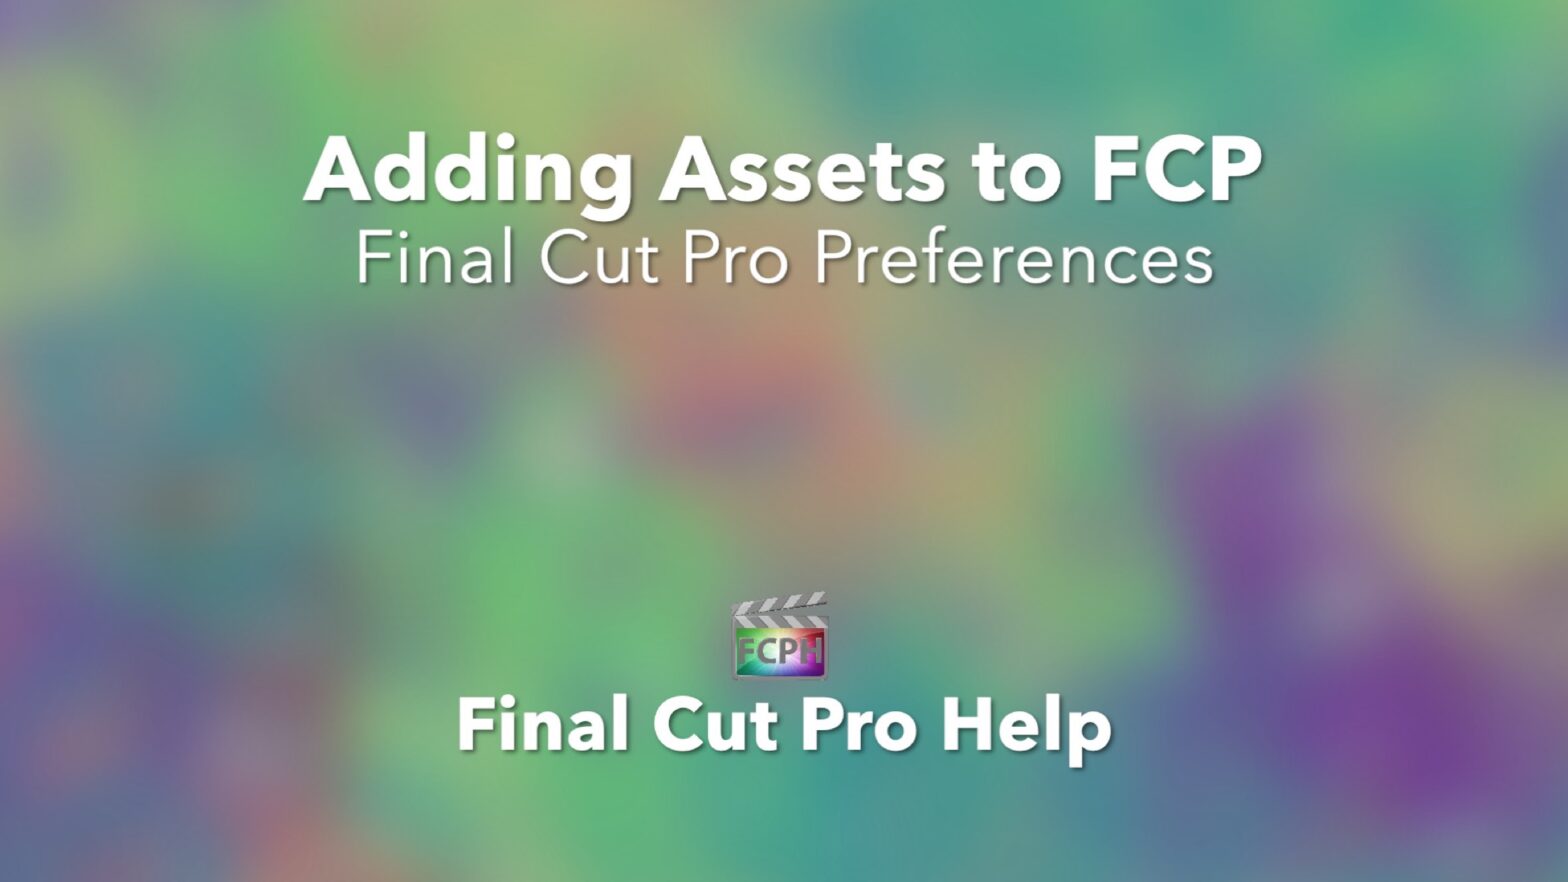 Adding Assets to FCP Final Cut Pro Preferences